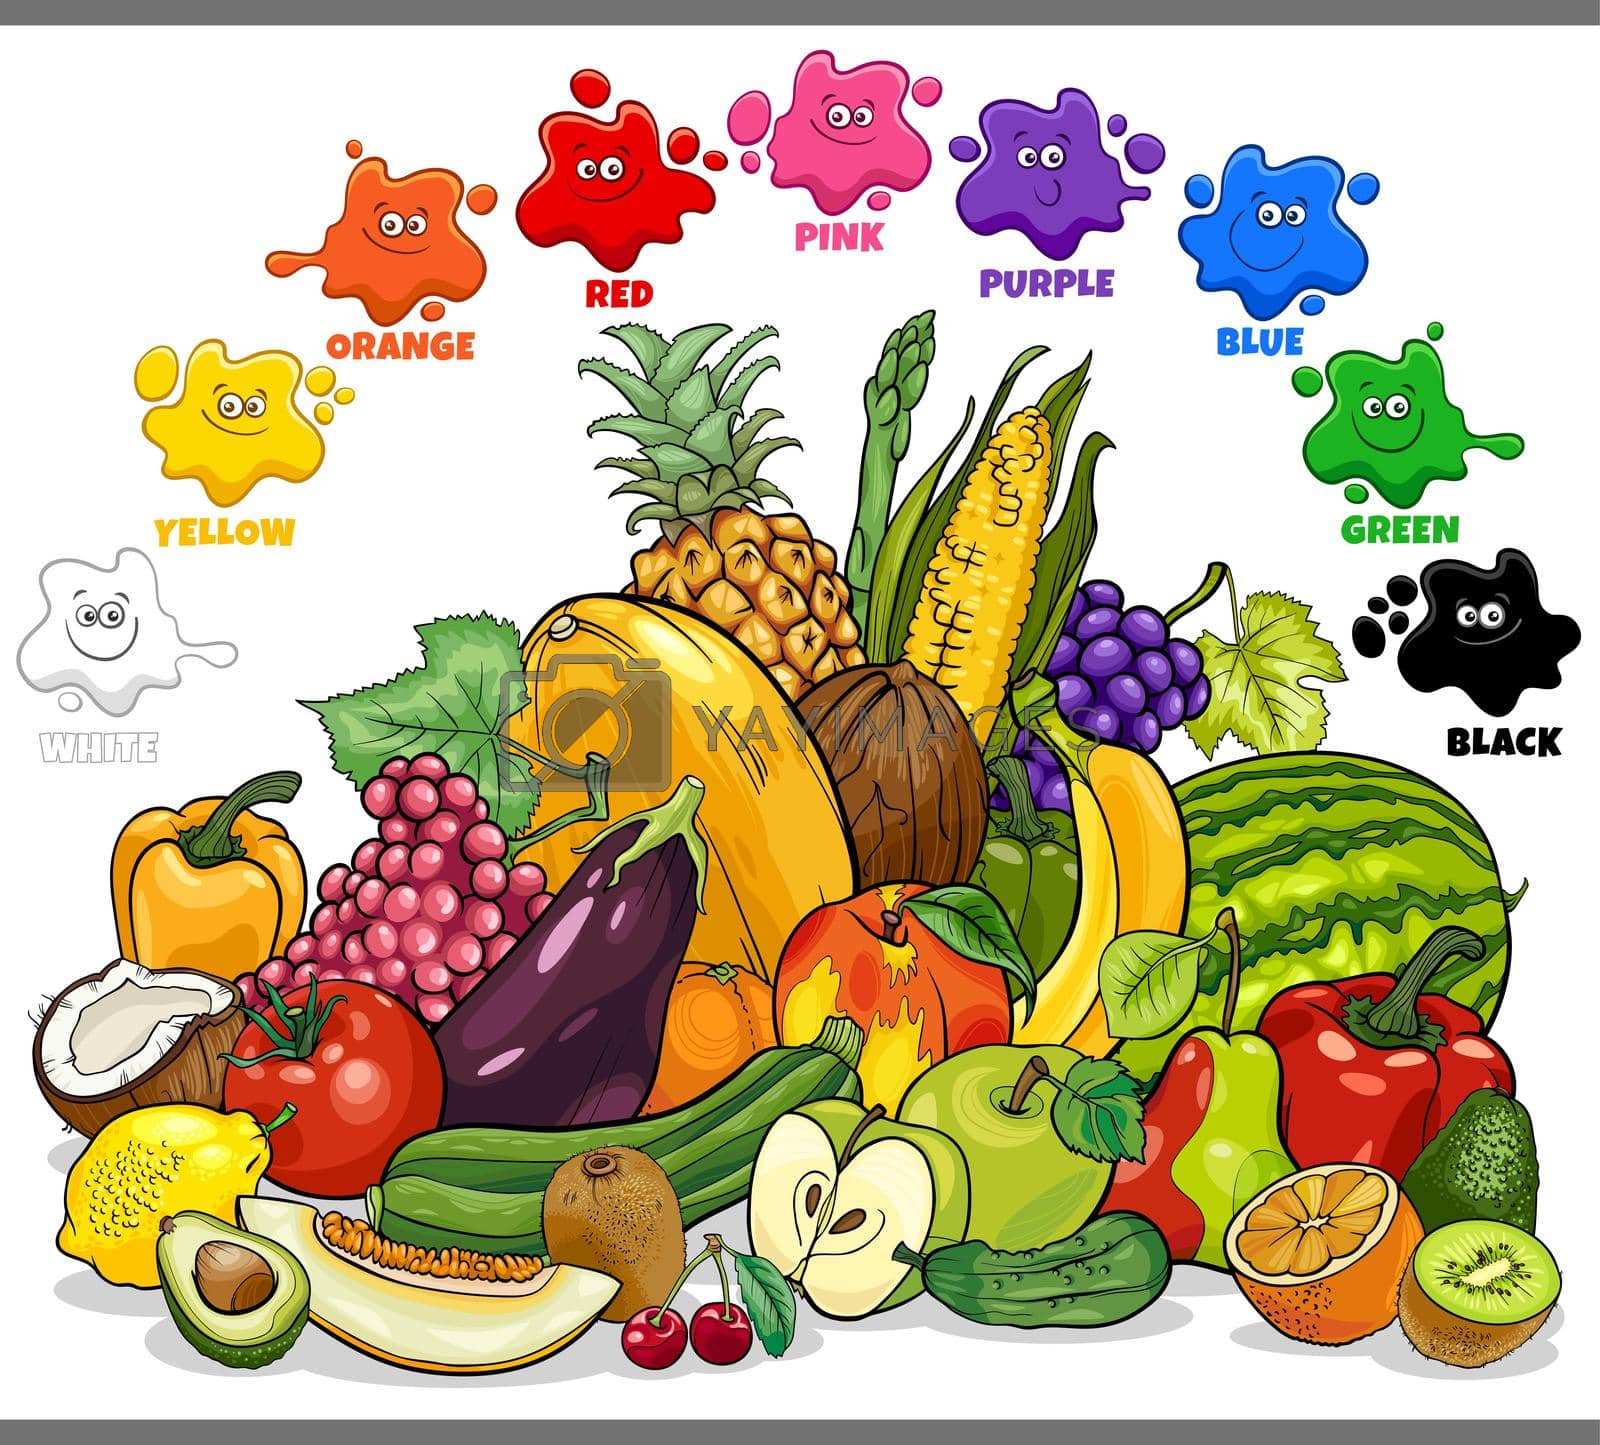 Royalty free image of basic colors for children with fruits and vegetables group by izakowski